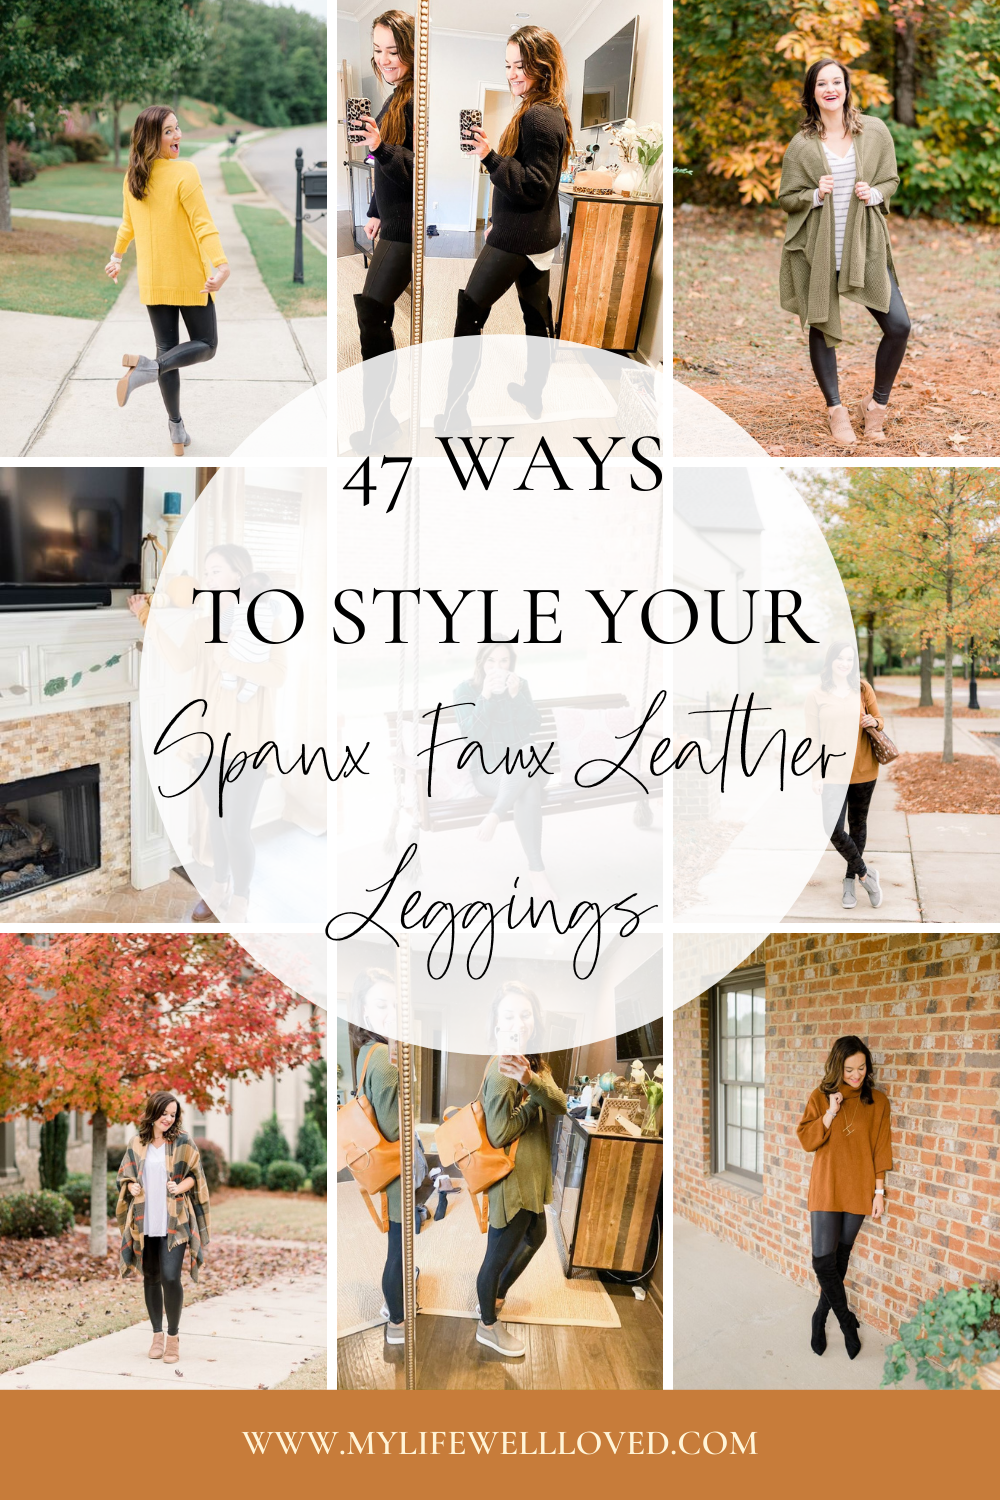 SPANX: Leather Legging – Everyday Chic Boutique